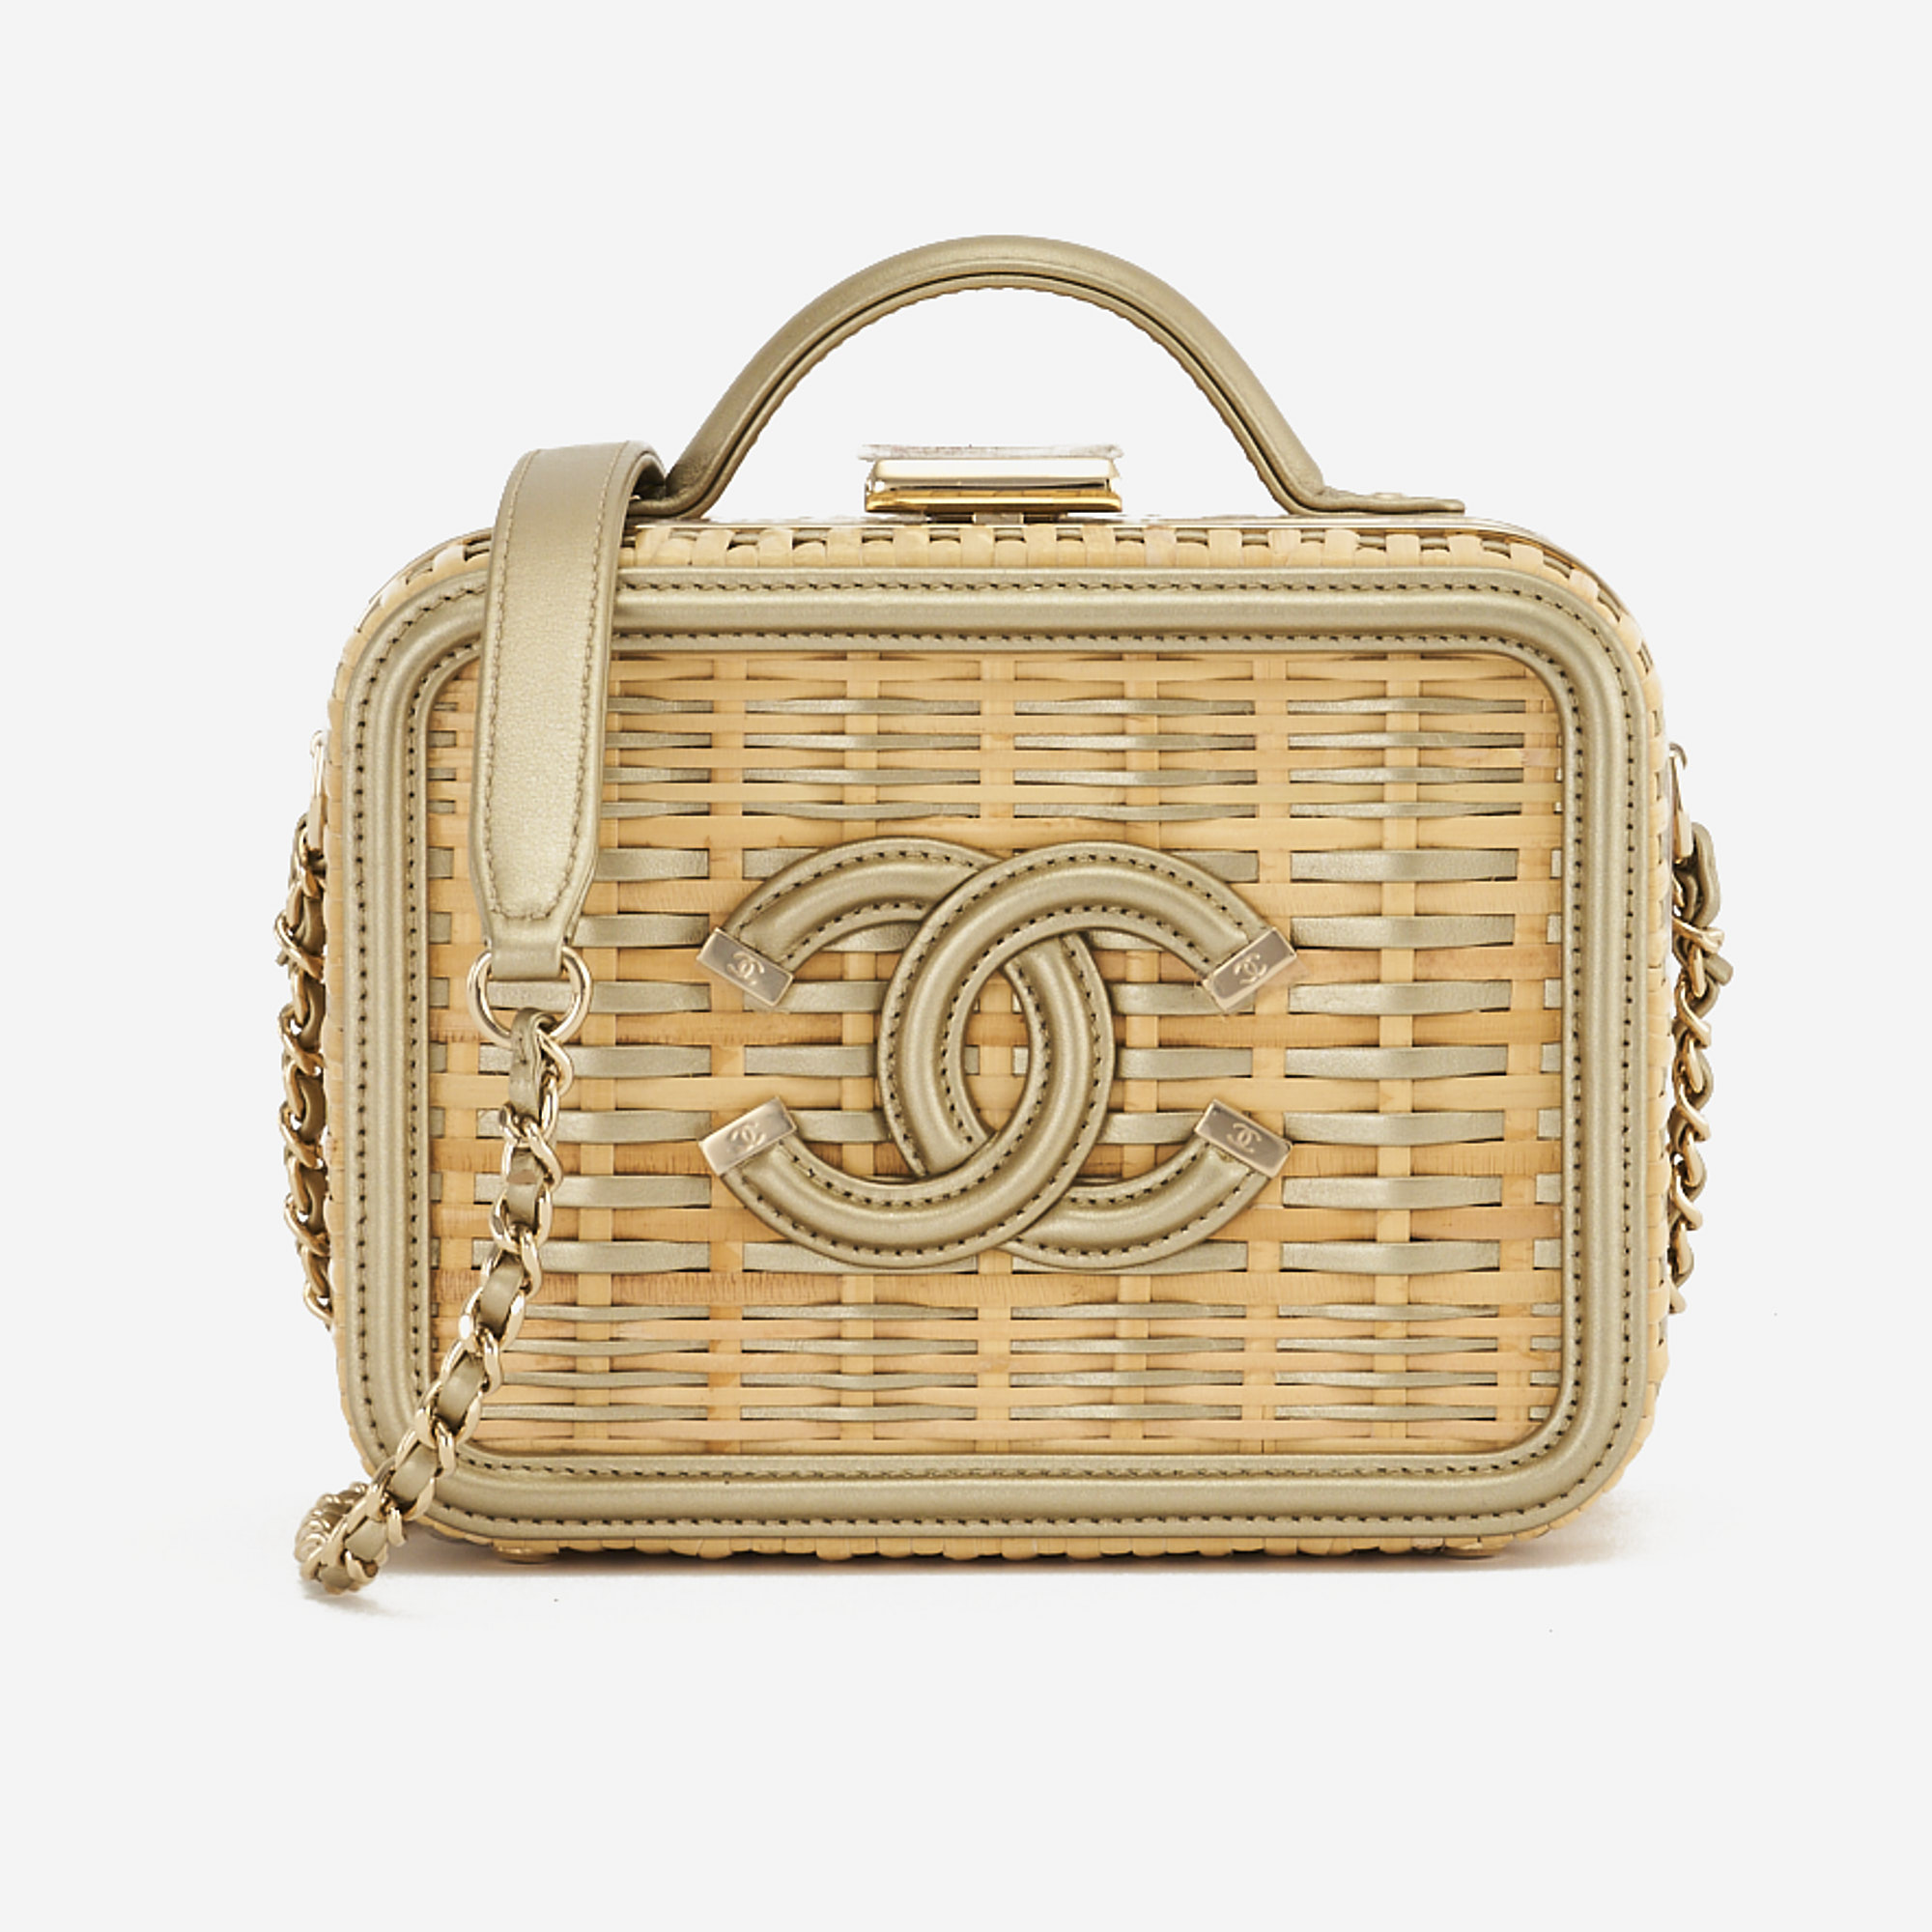 Chanel Vanity Case Small Straw/Calf Beige/Gold